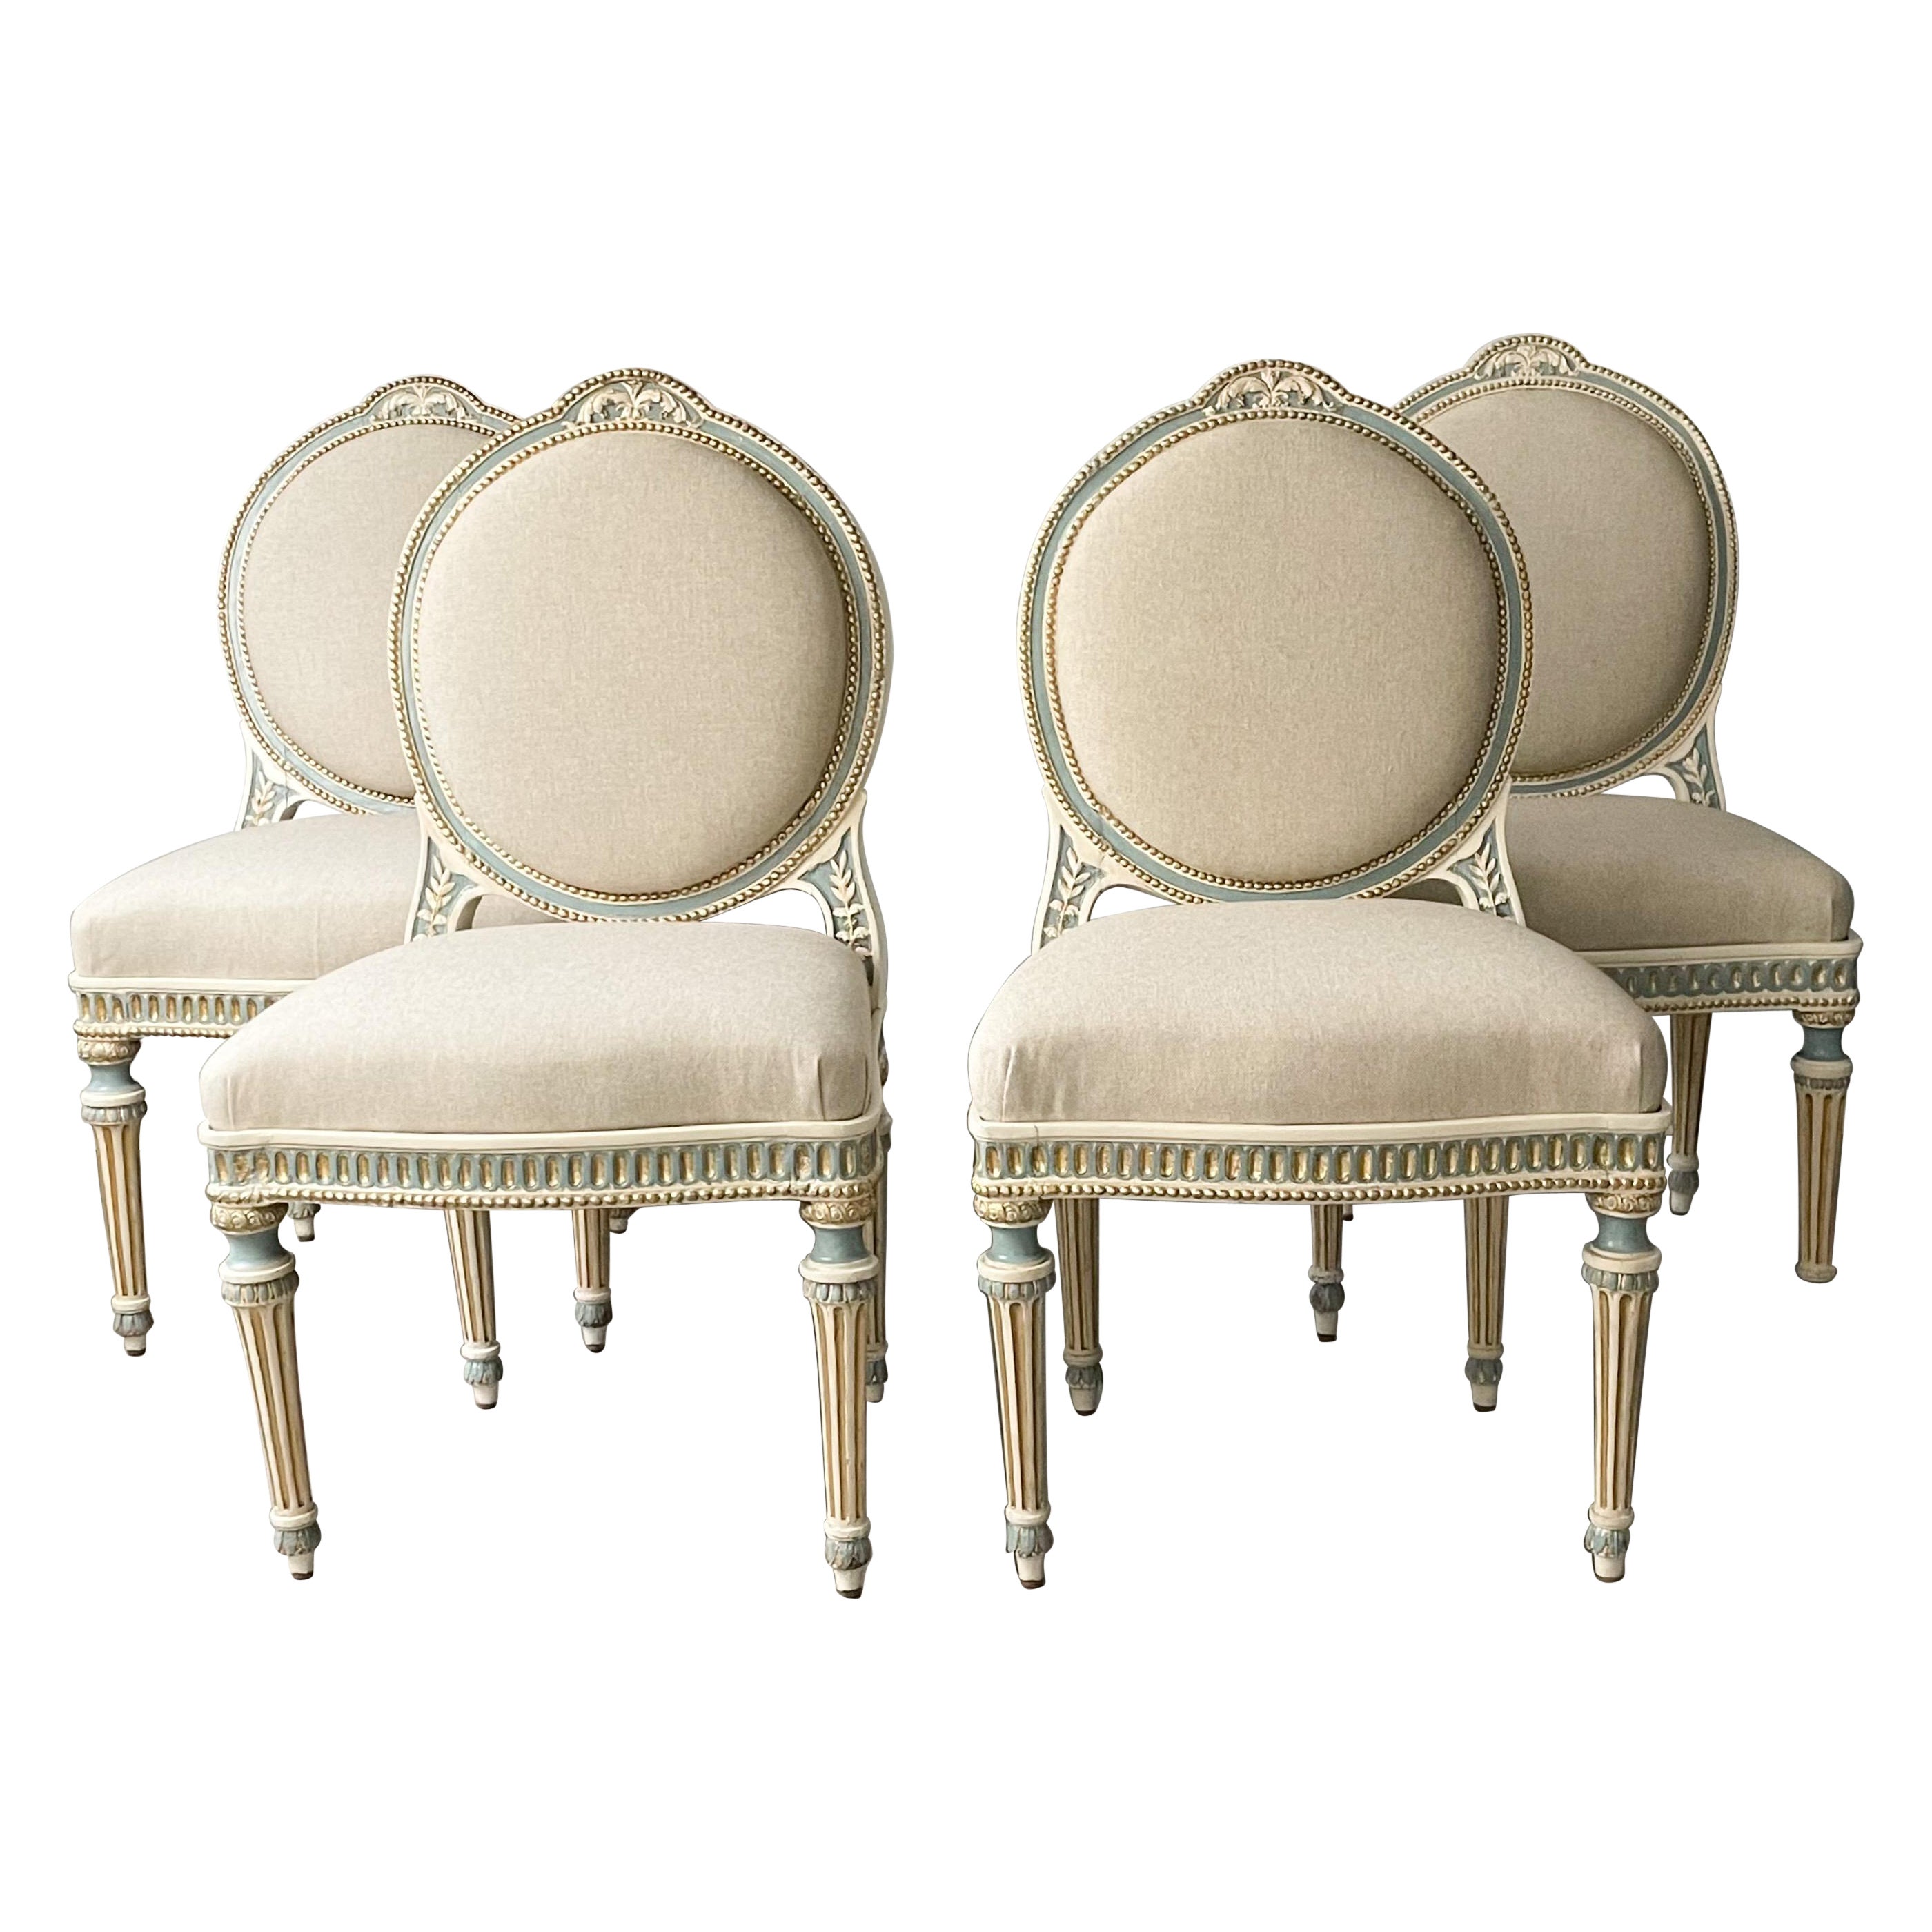 Set Of Four Antique French Louis XVI-Style Chairs